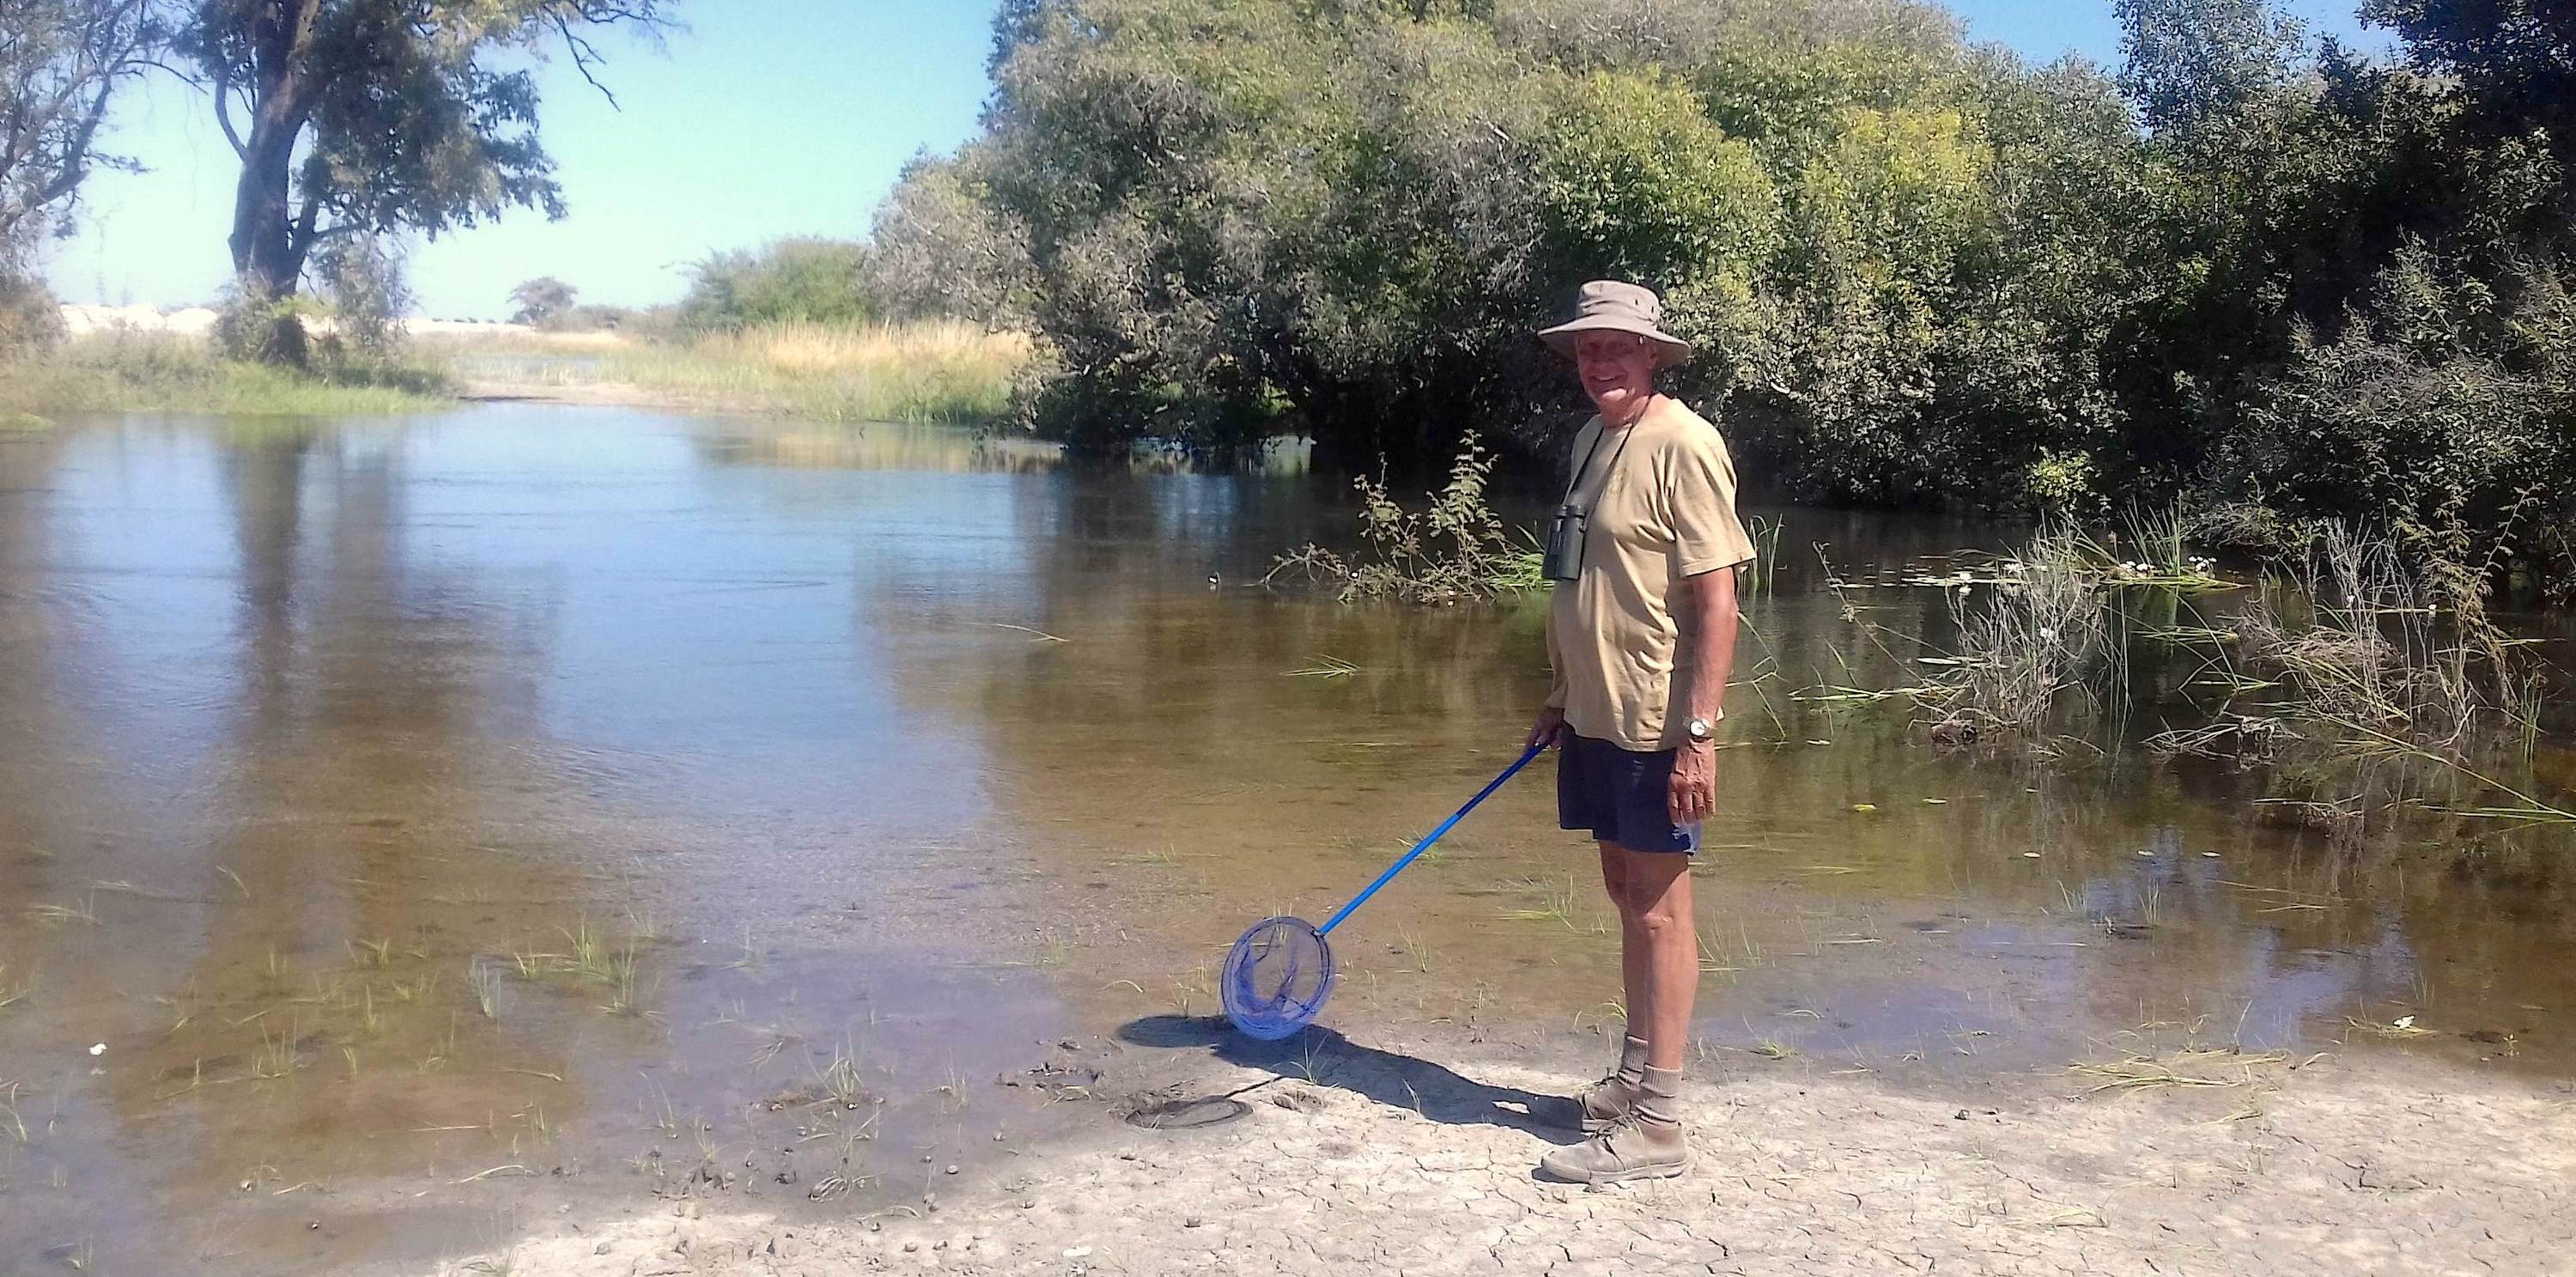 Dave Ward standing by a small lake, while holding a net on a pole.